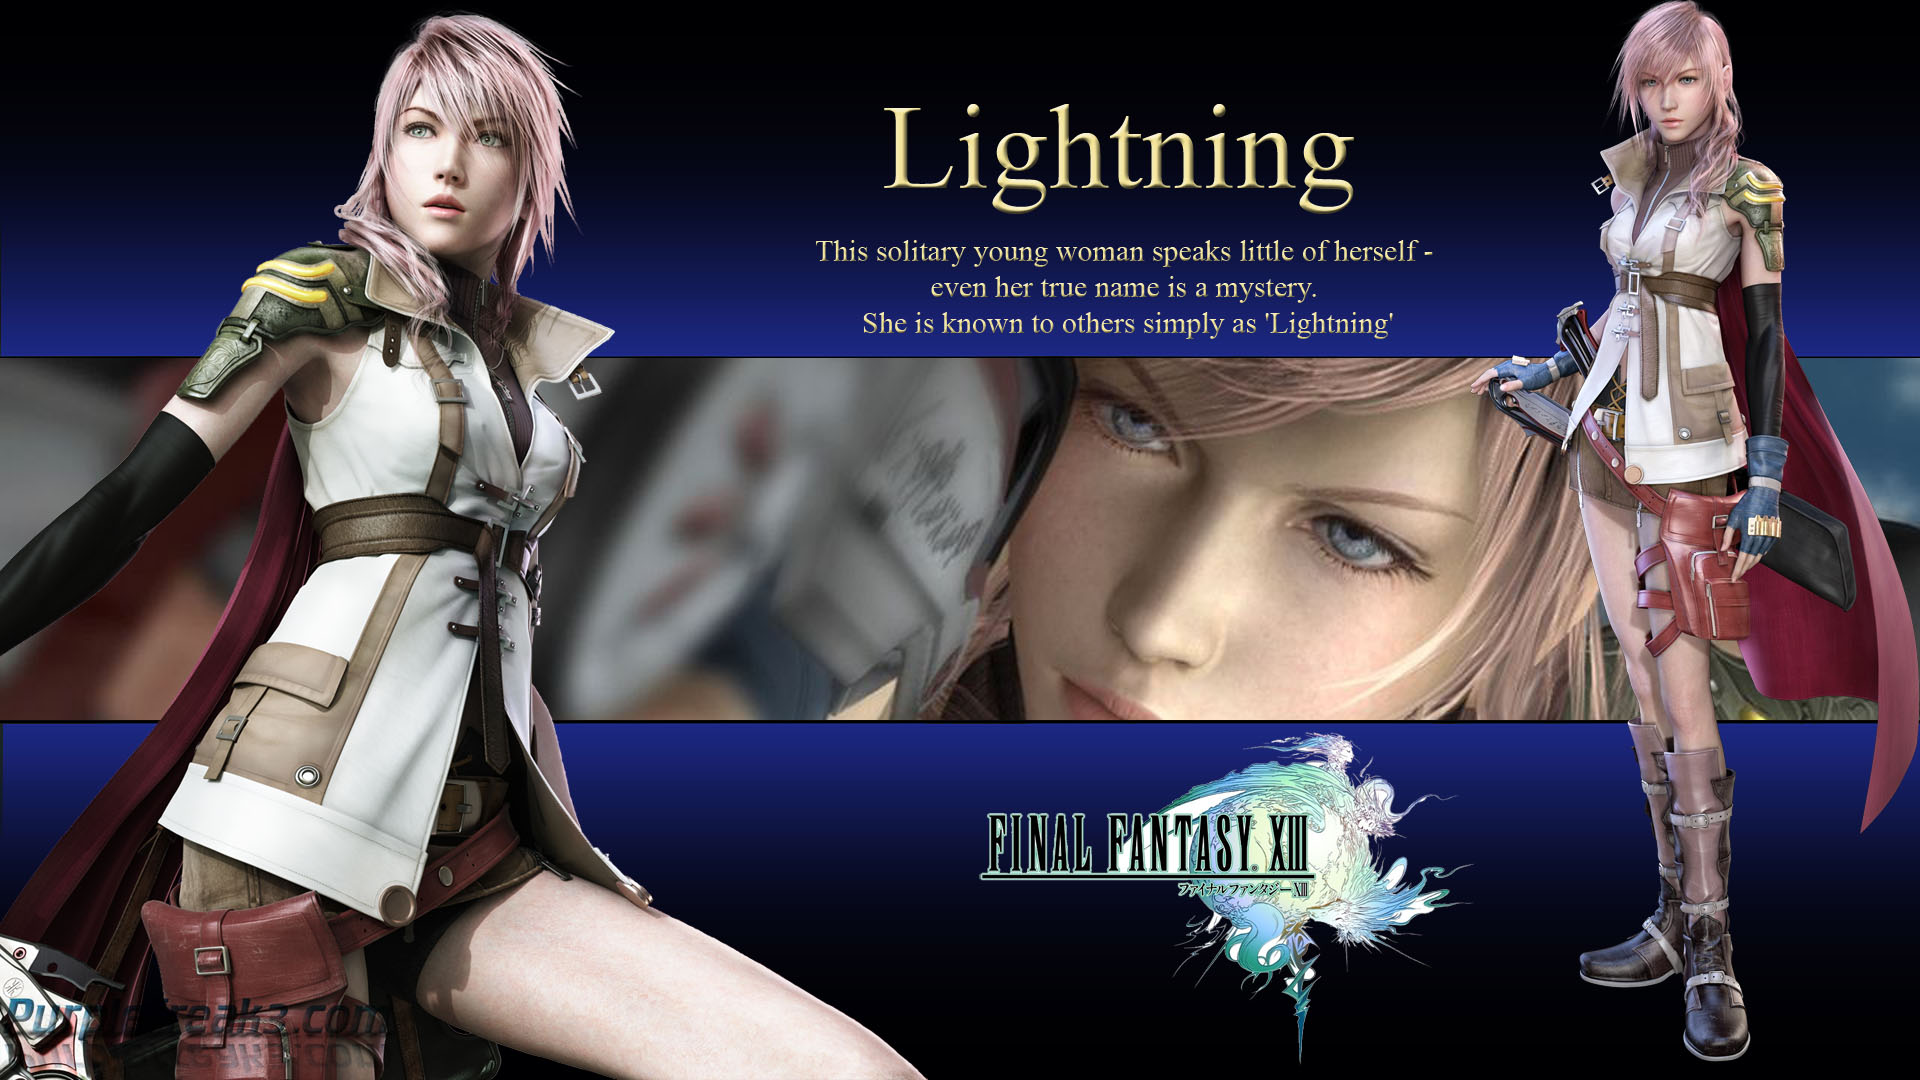 Wallpaper Photos Pictures Pics Image Lightning Final Fantasy